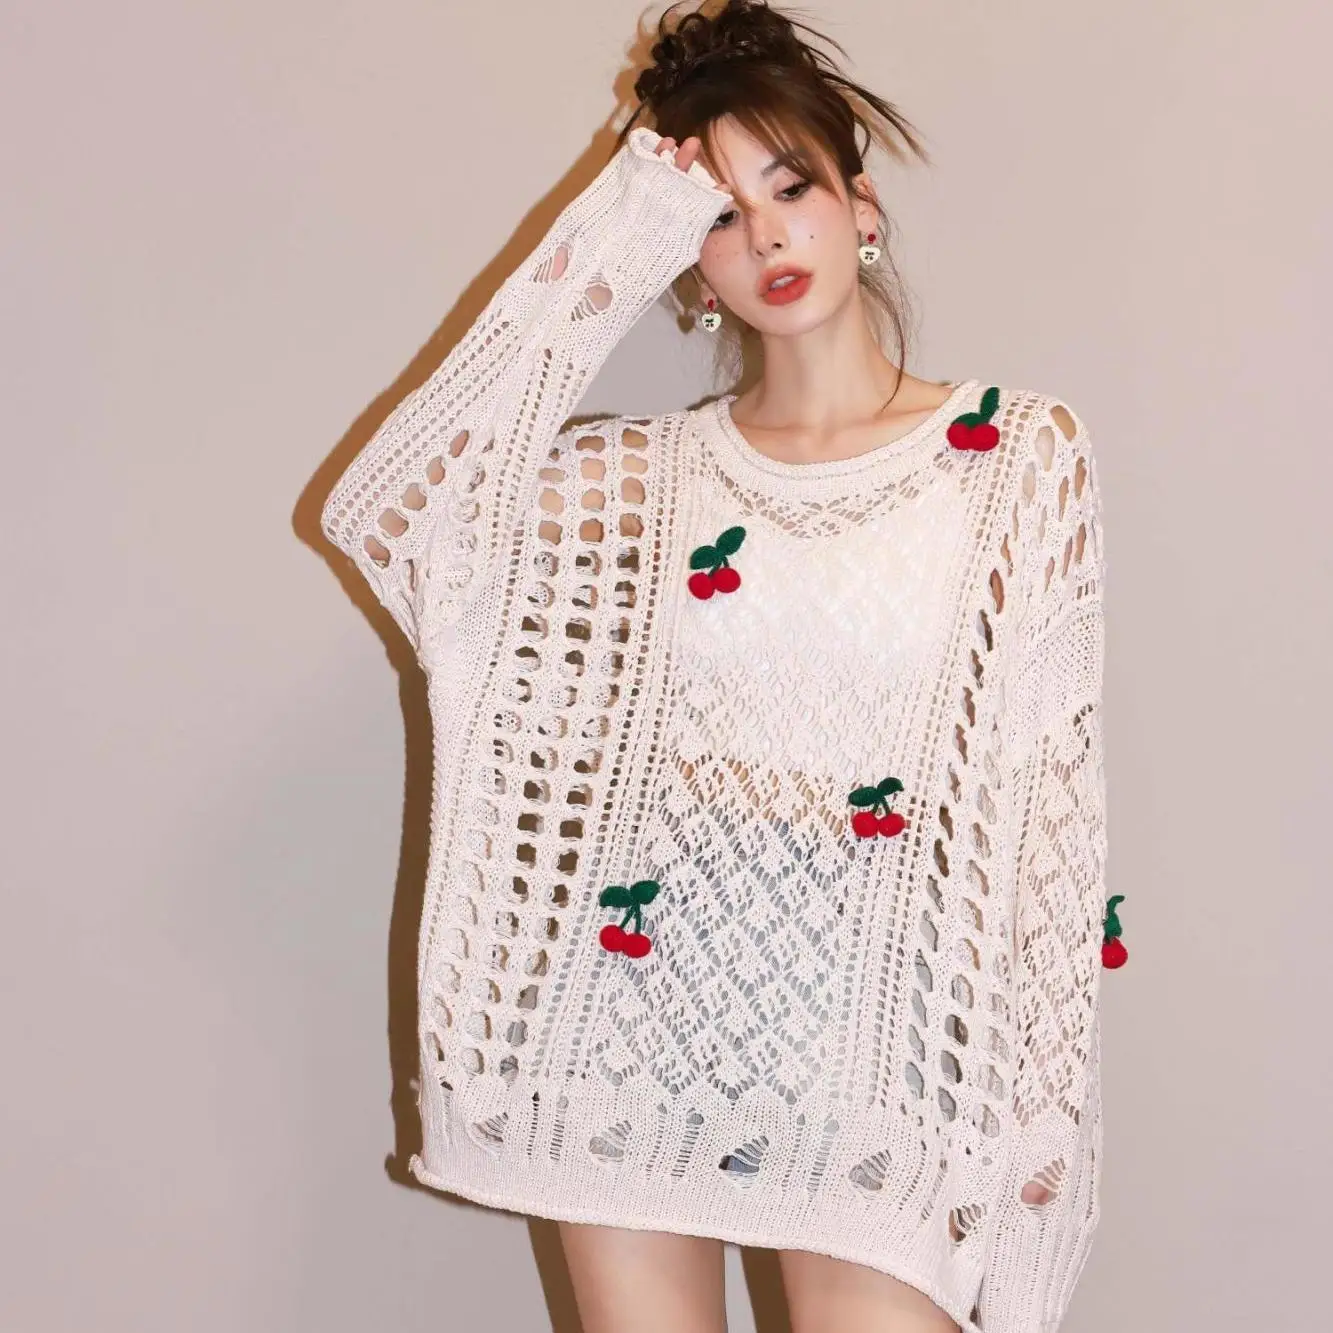 

Ladies Fashion Mesh Hollowed Out See-through Cherry Pullover Sweater Tshirts Women Sexy Tops Female Girl Casual Knitted T-shirt